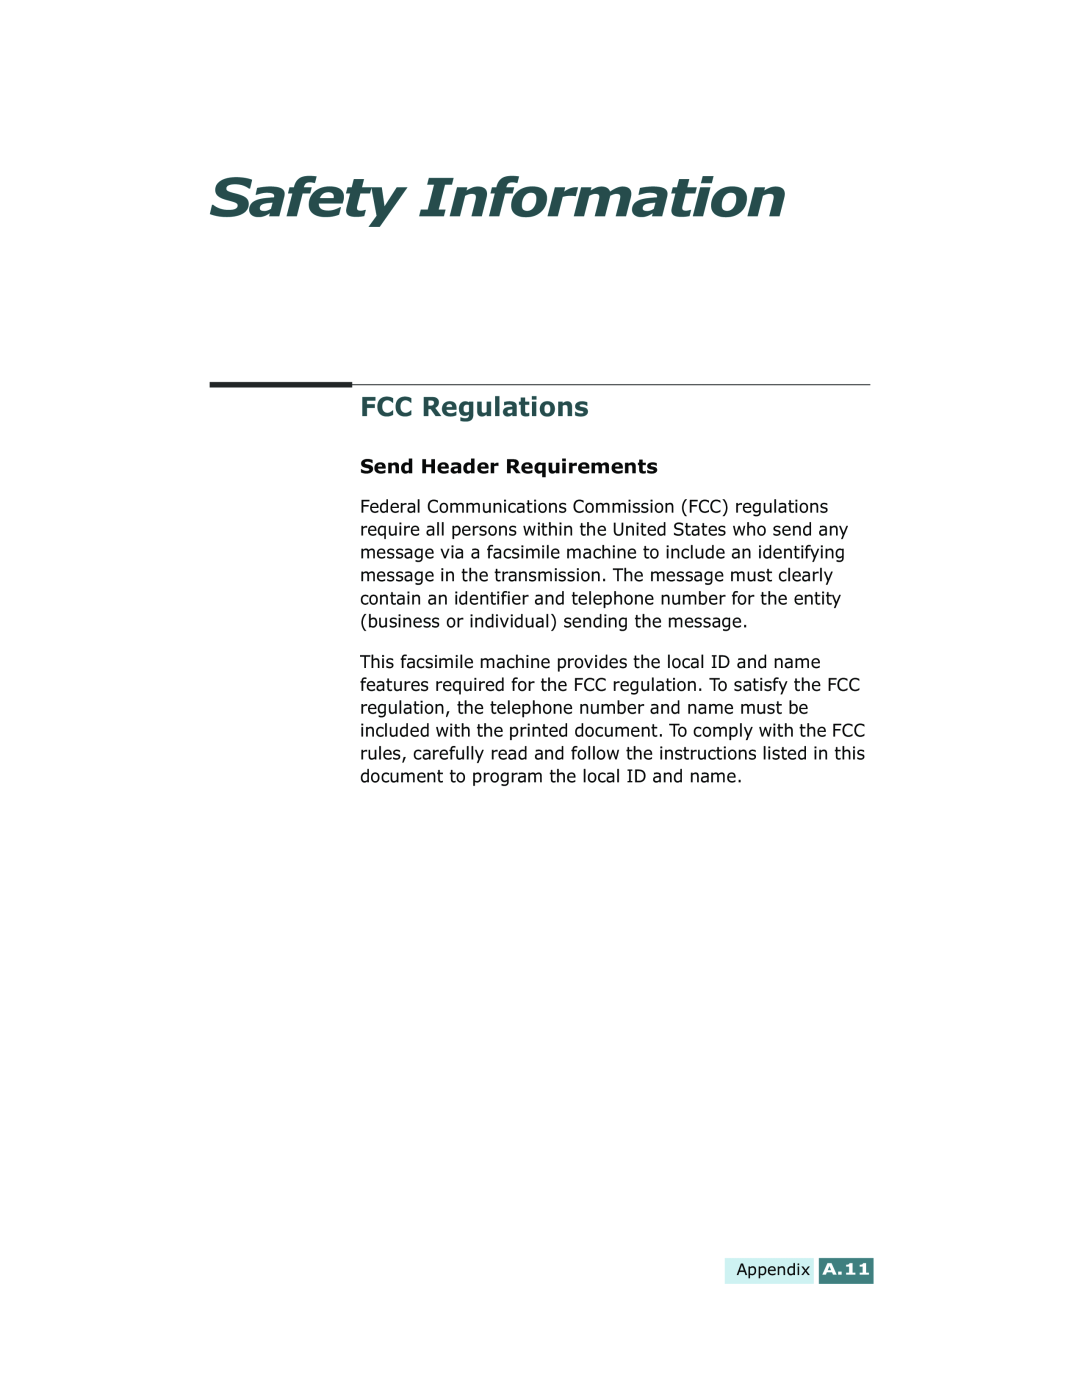 Xerox Pro 580 manual Safety Information, FCC Regulations, Send Header Requirements 